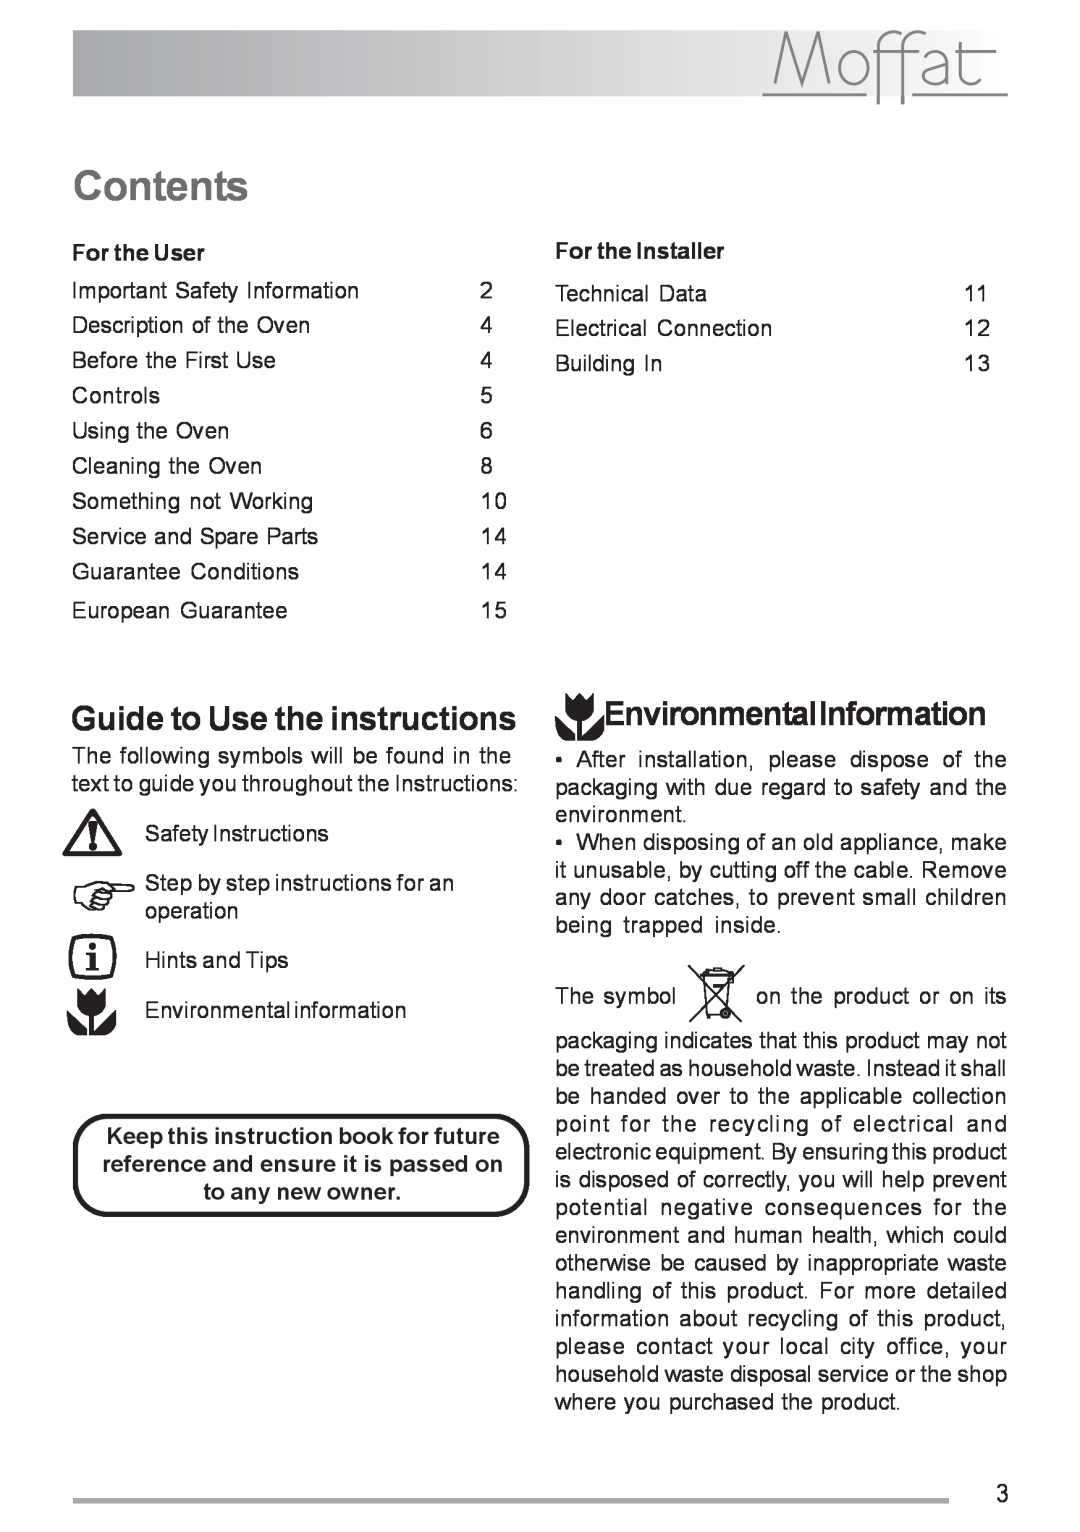 Moffat MSS 601 manual Contents, Guide to Use the instructions, EnvironmentalInformation, For the User, For the Installer 